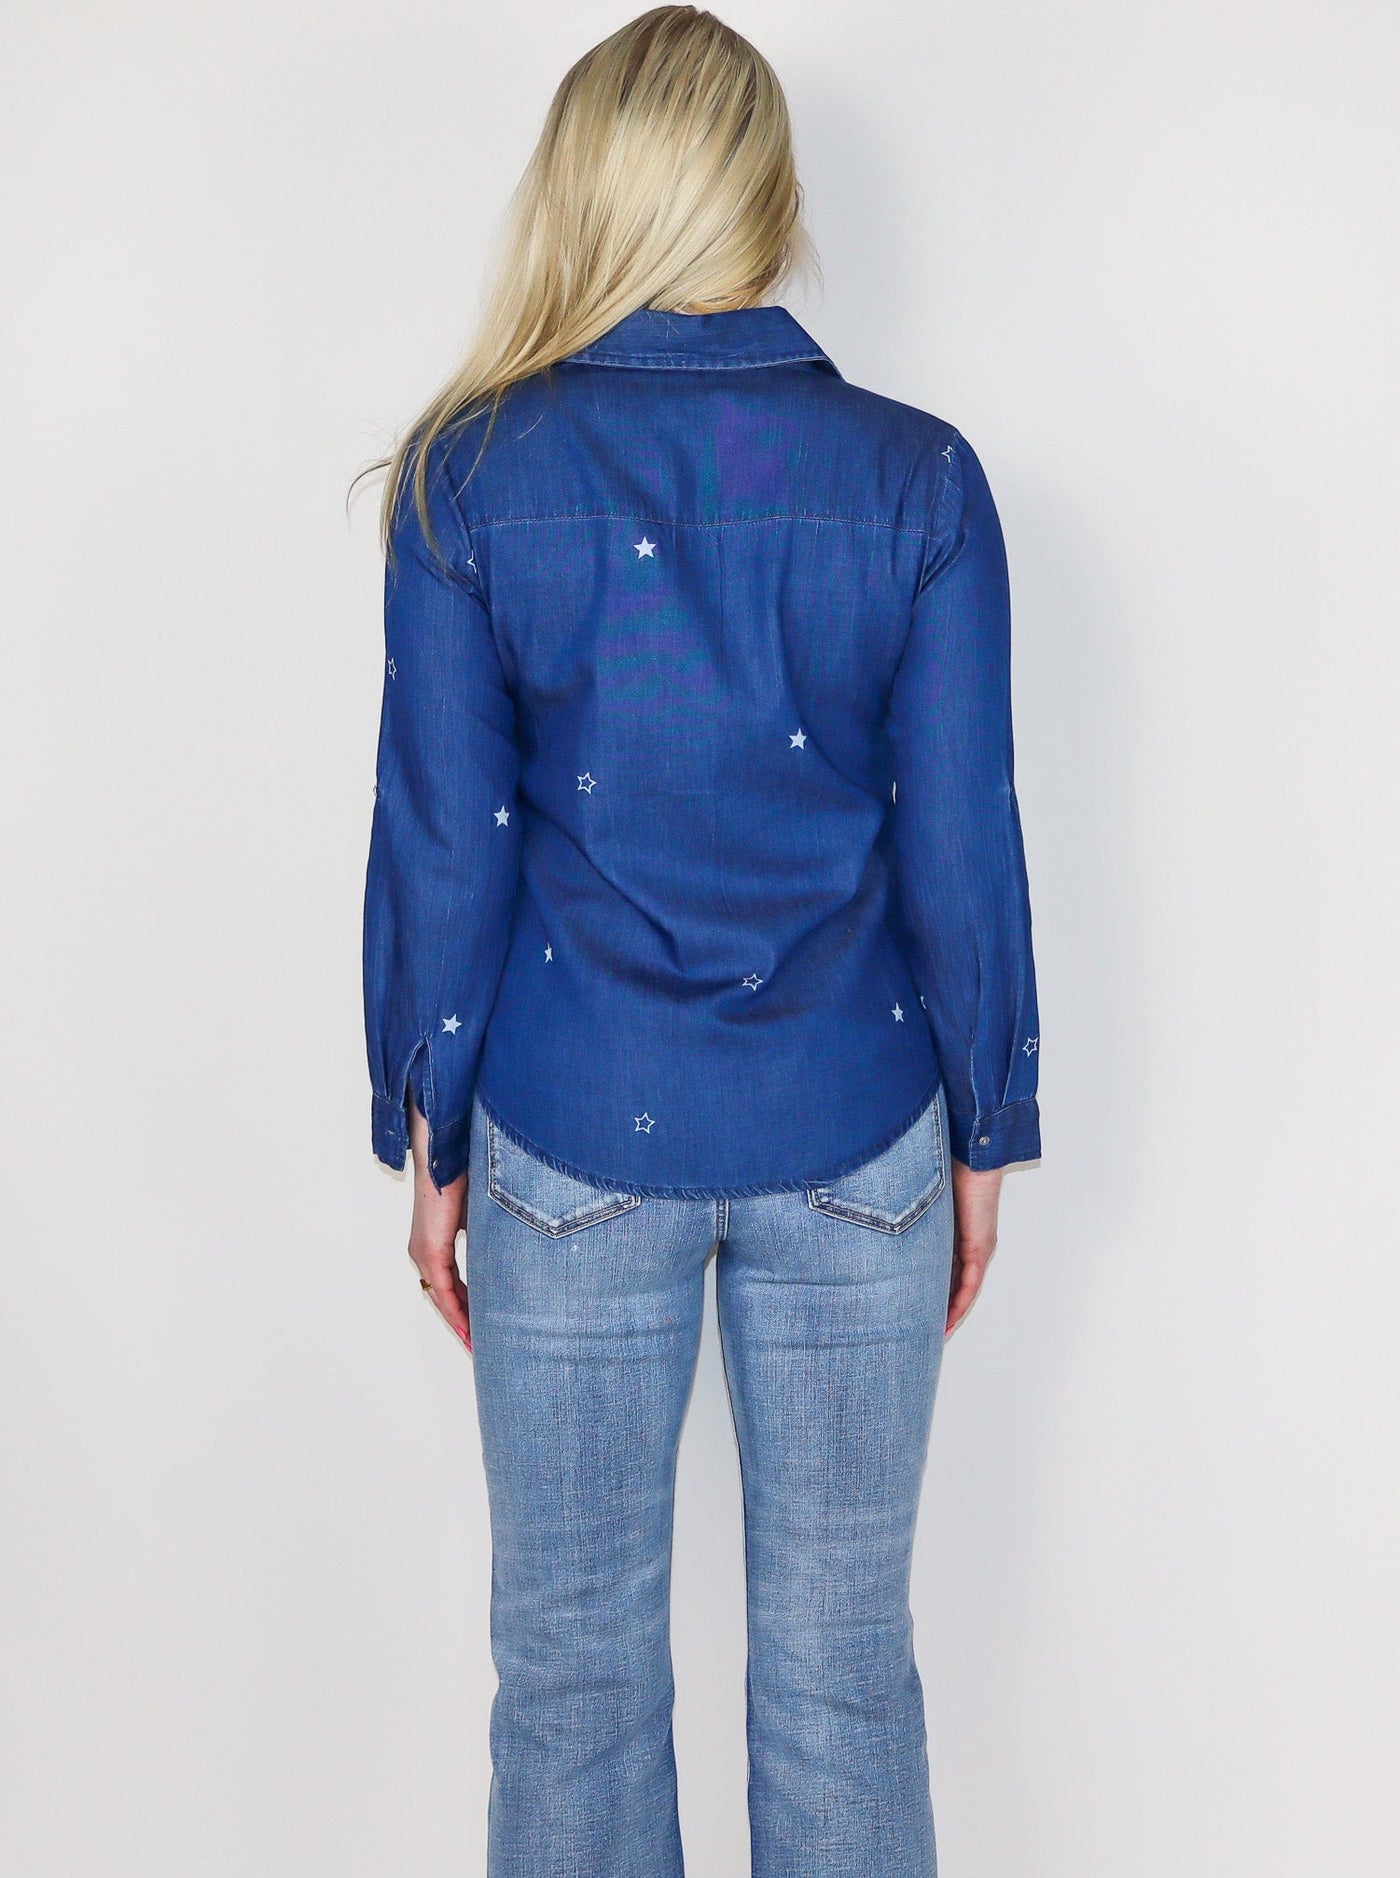 Model is wearing a dark blue wash denim button up with white stars all over. Top is worn with blue jeans.